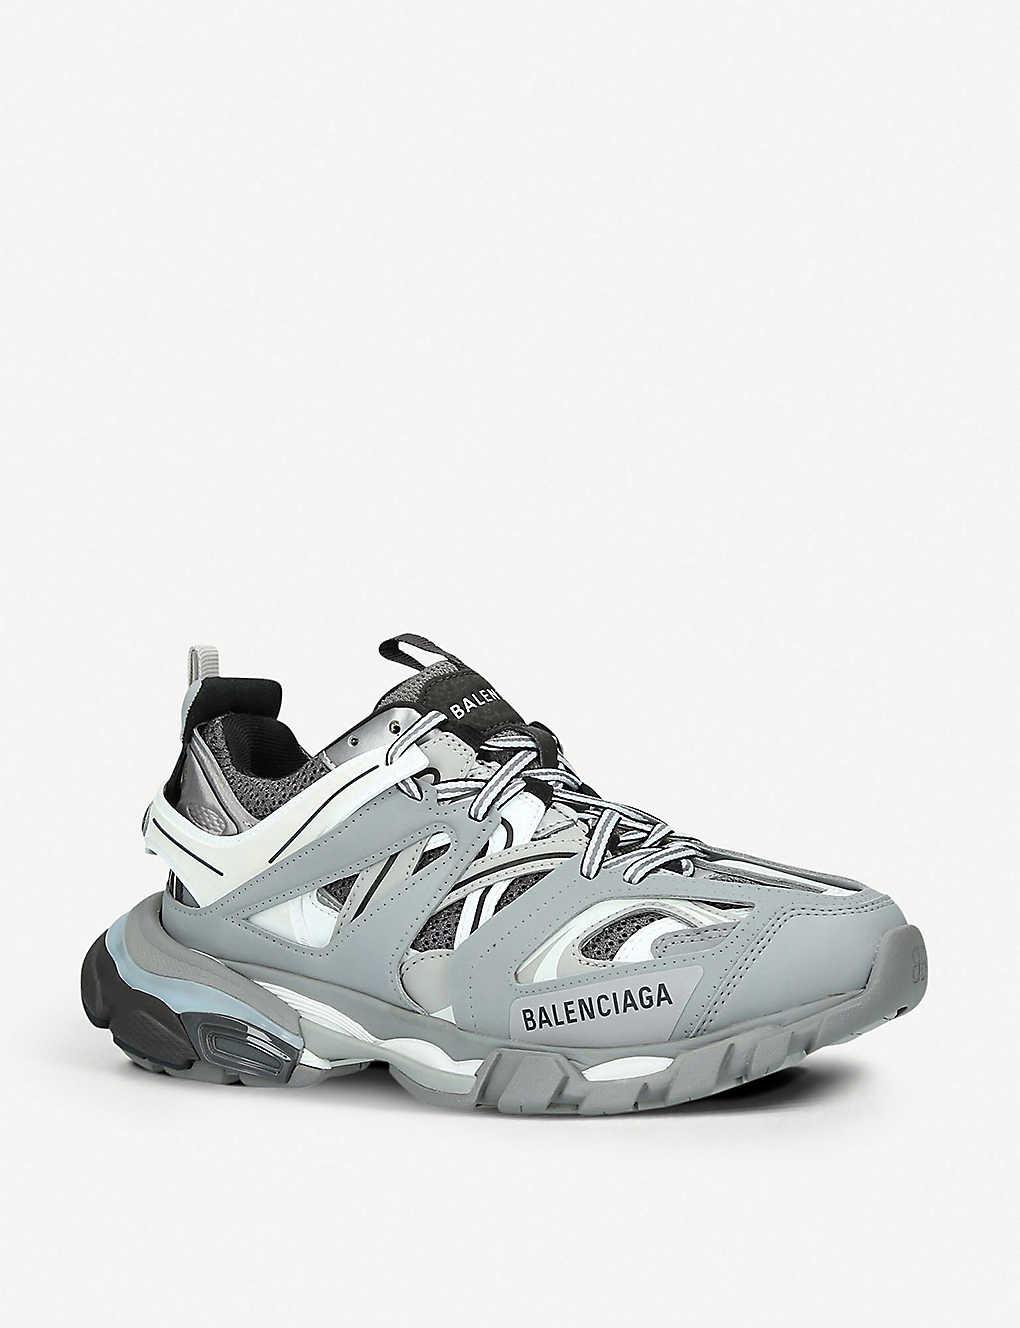 Balenciaga Rubber Track Trainers in Grey (Gray) for Men - Save 61% - Lyst